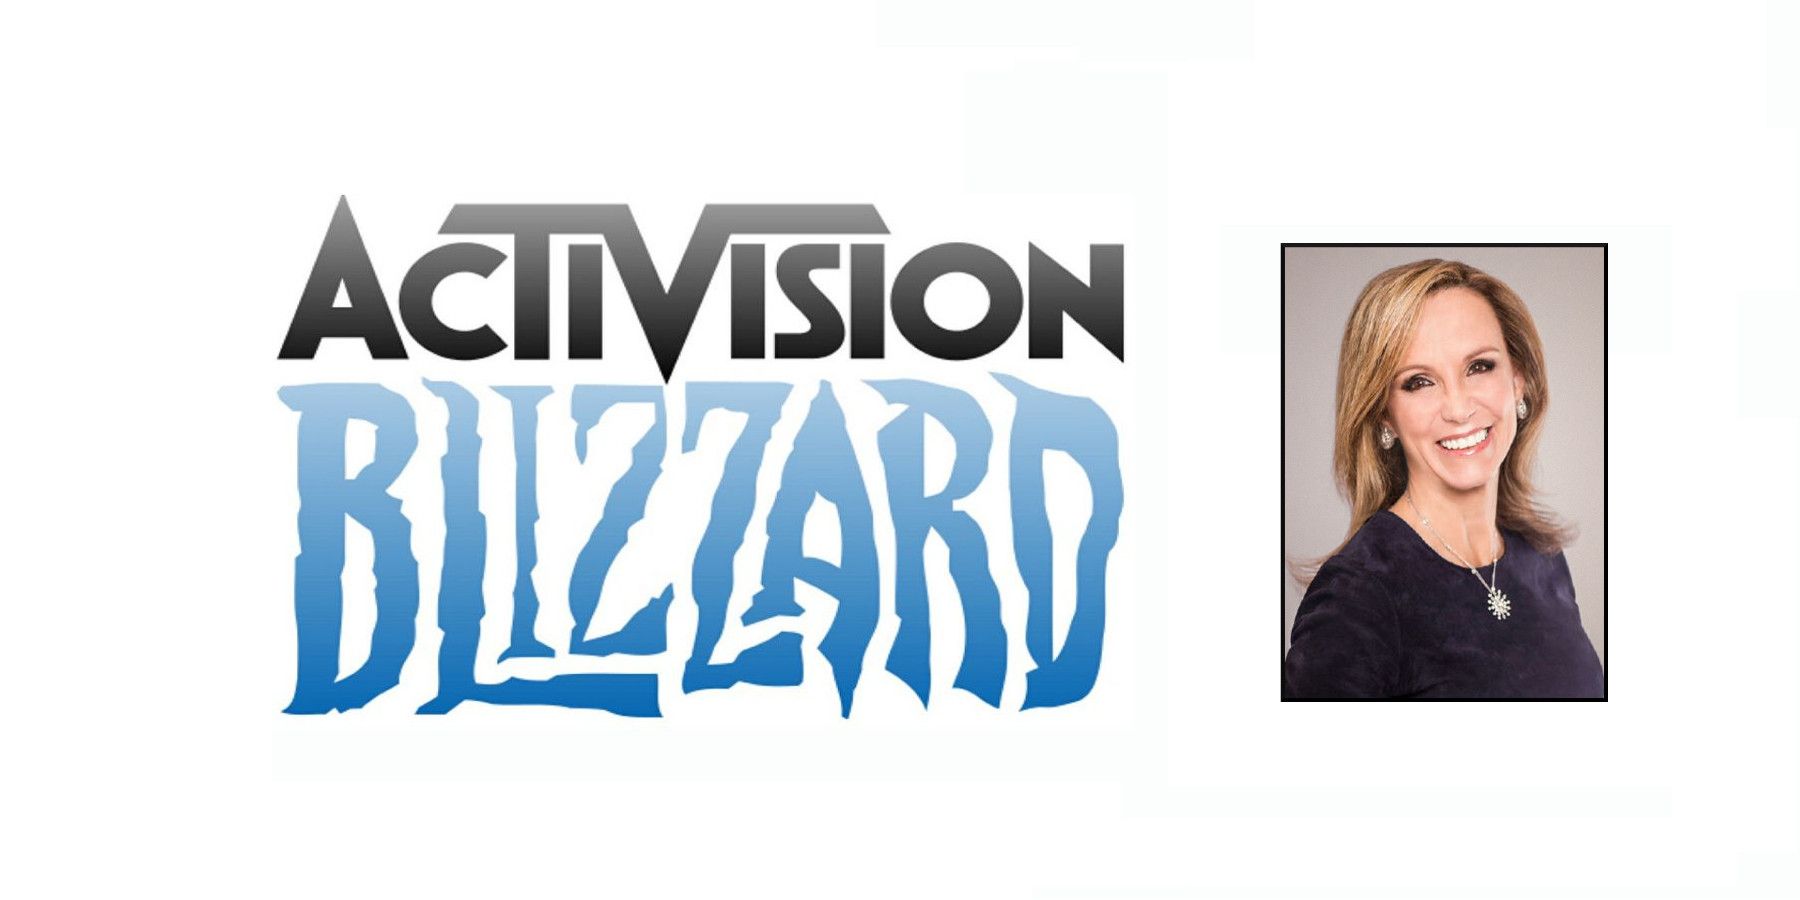 Activision Blizzard CCO is Stepping Down